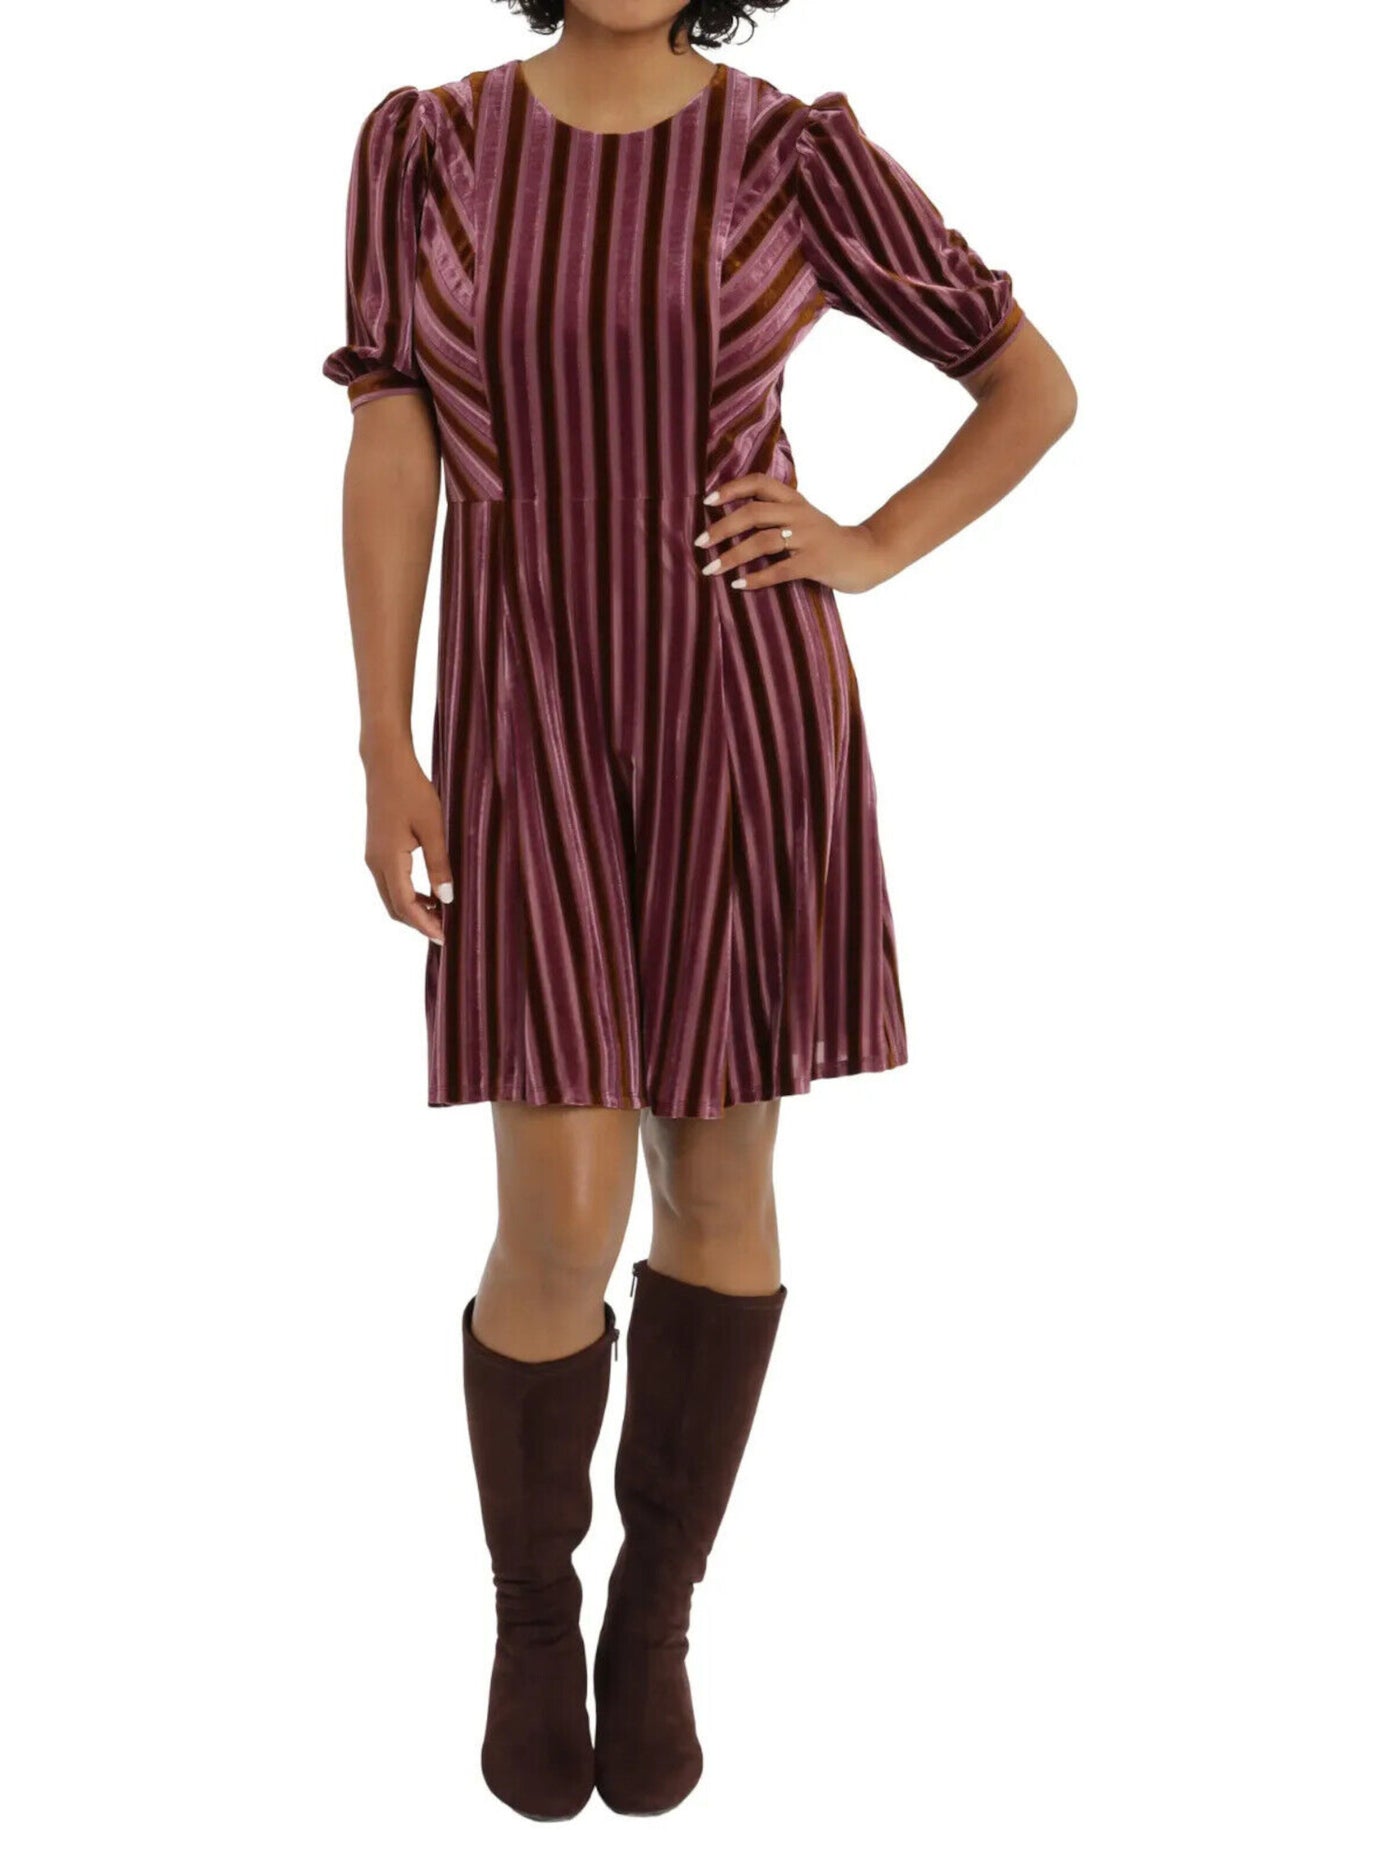 LONDON TIMES Womens Burgundy Stretch Zippered Lined Striped Pouf Sleeve Jewel Neck Above The Knee Party Fit + Flare Dress 4